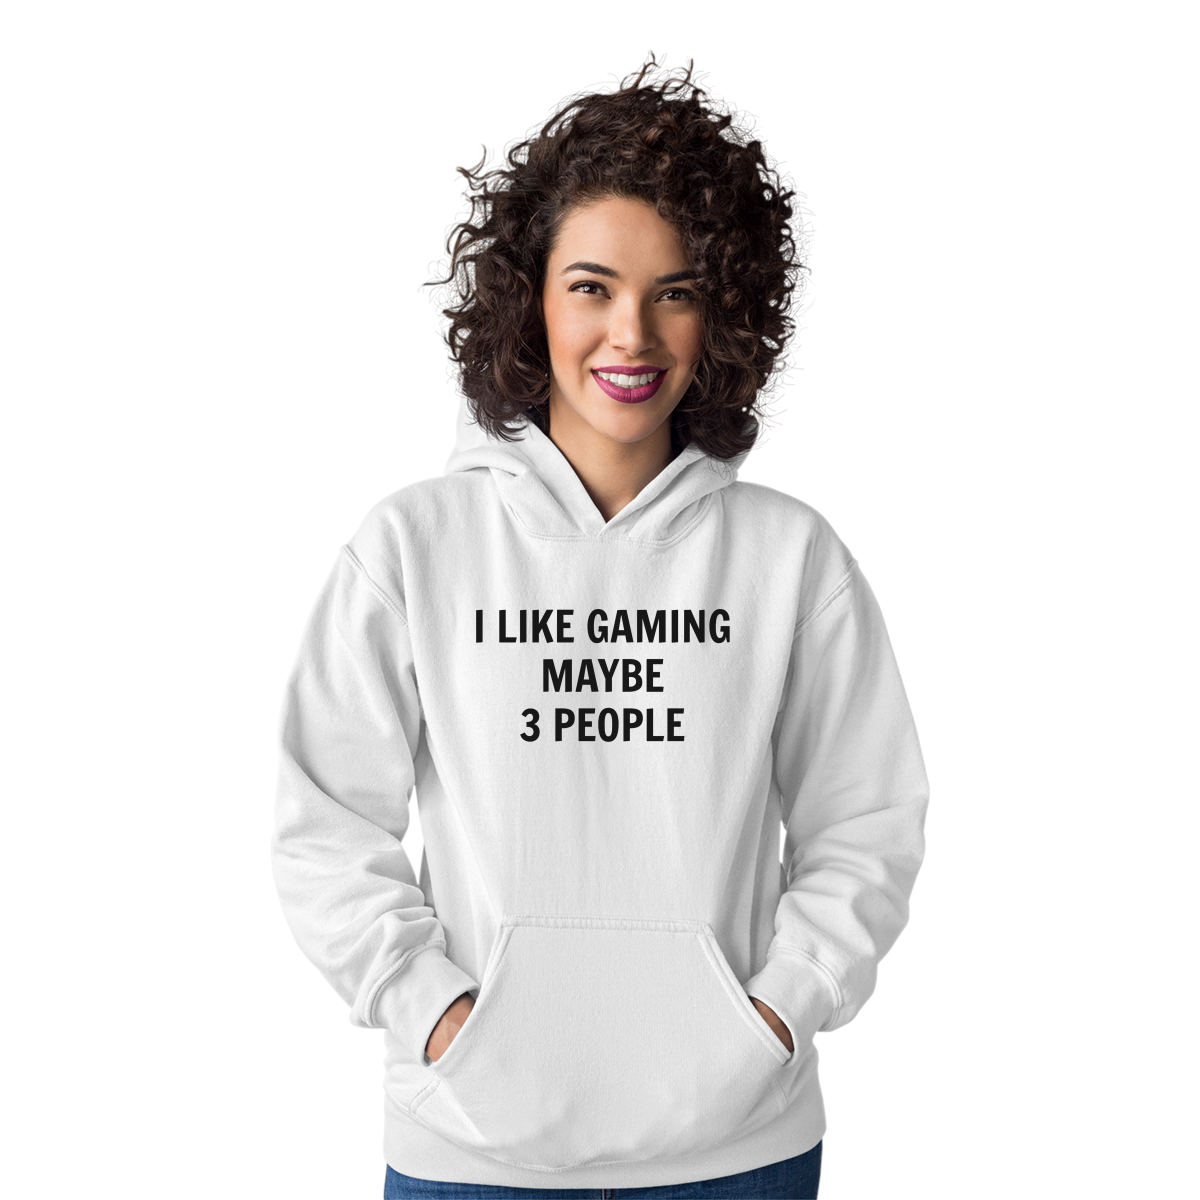 I Like Gaming and Maybe 3 People  Unisex Hoodie | White